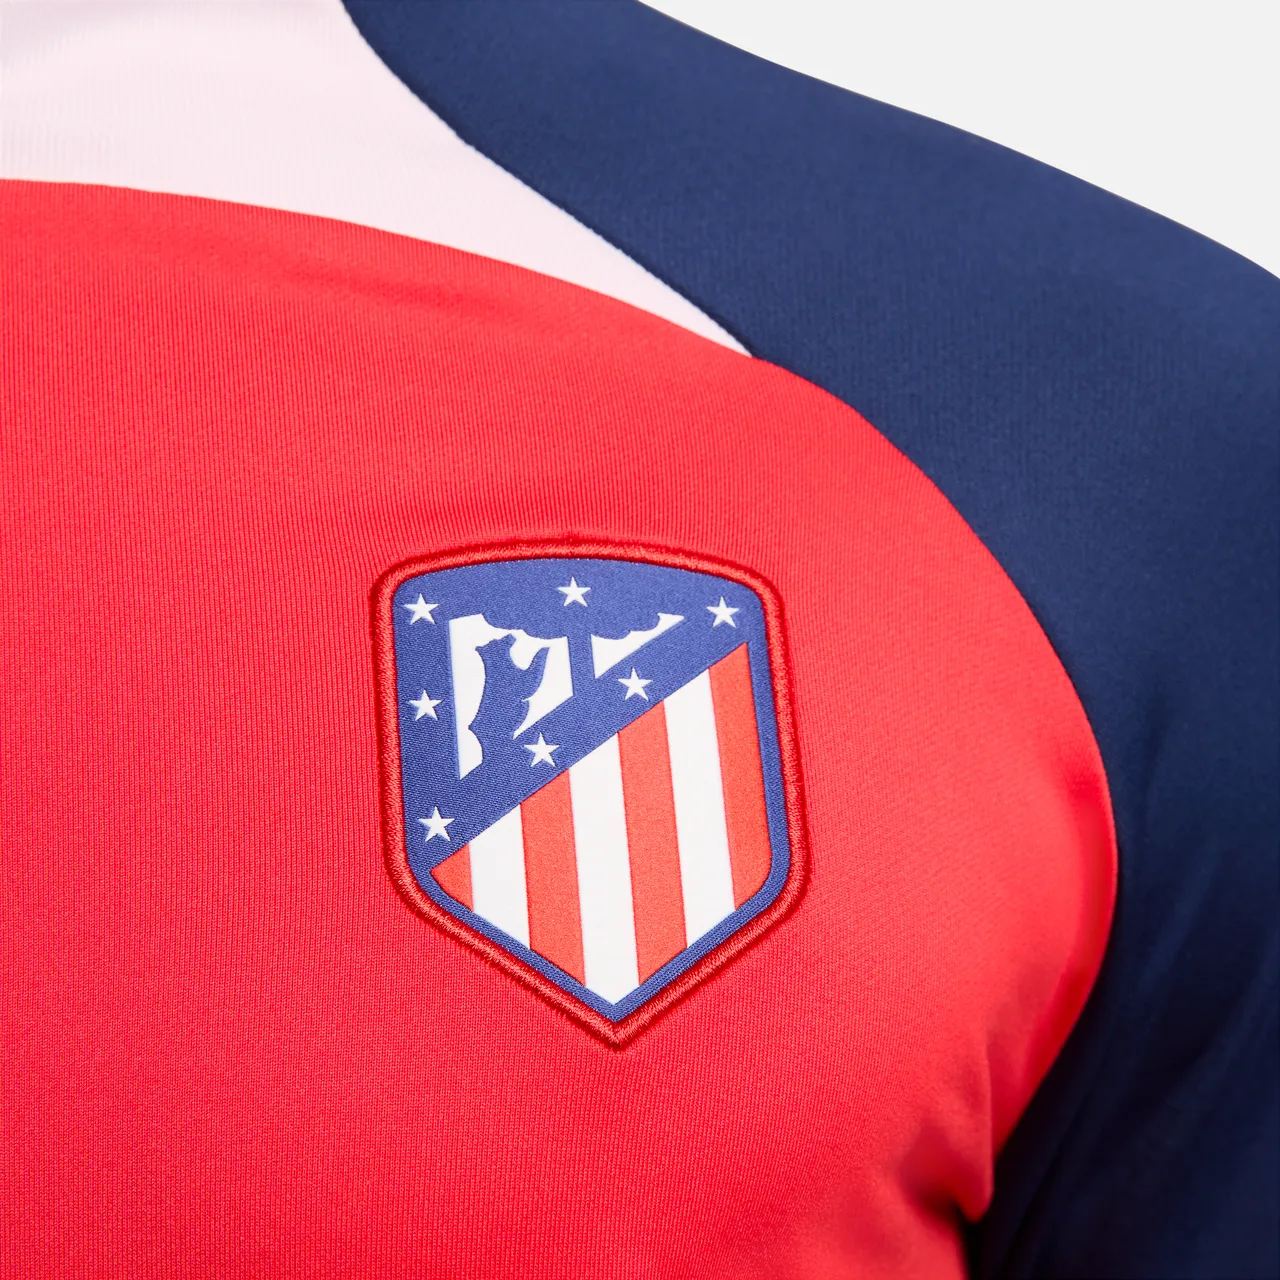 Atlético Madrid Strike Men's Nike Dri-FIT Football Drill Top - Red - Polyester